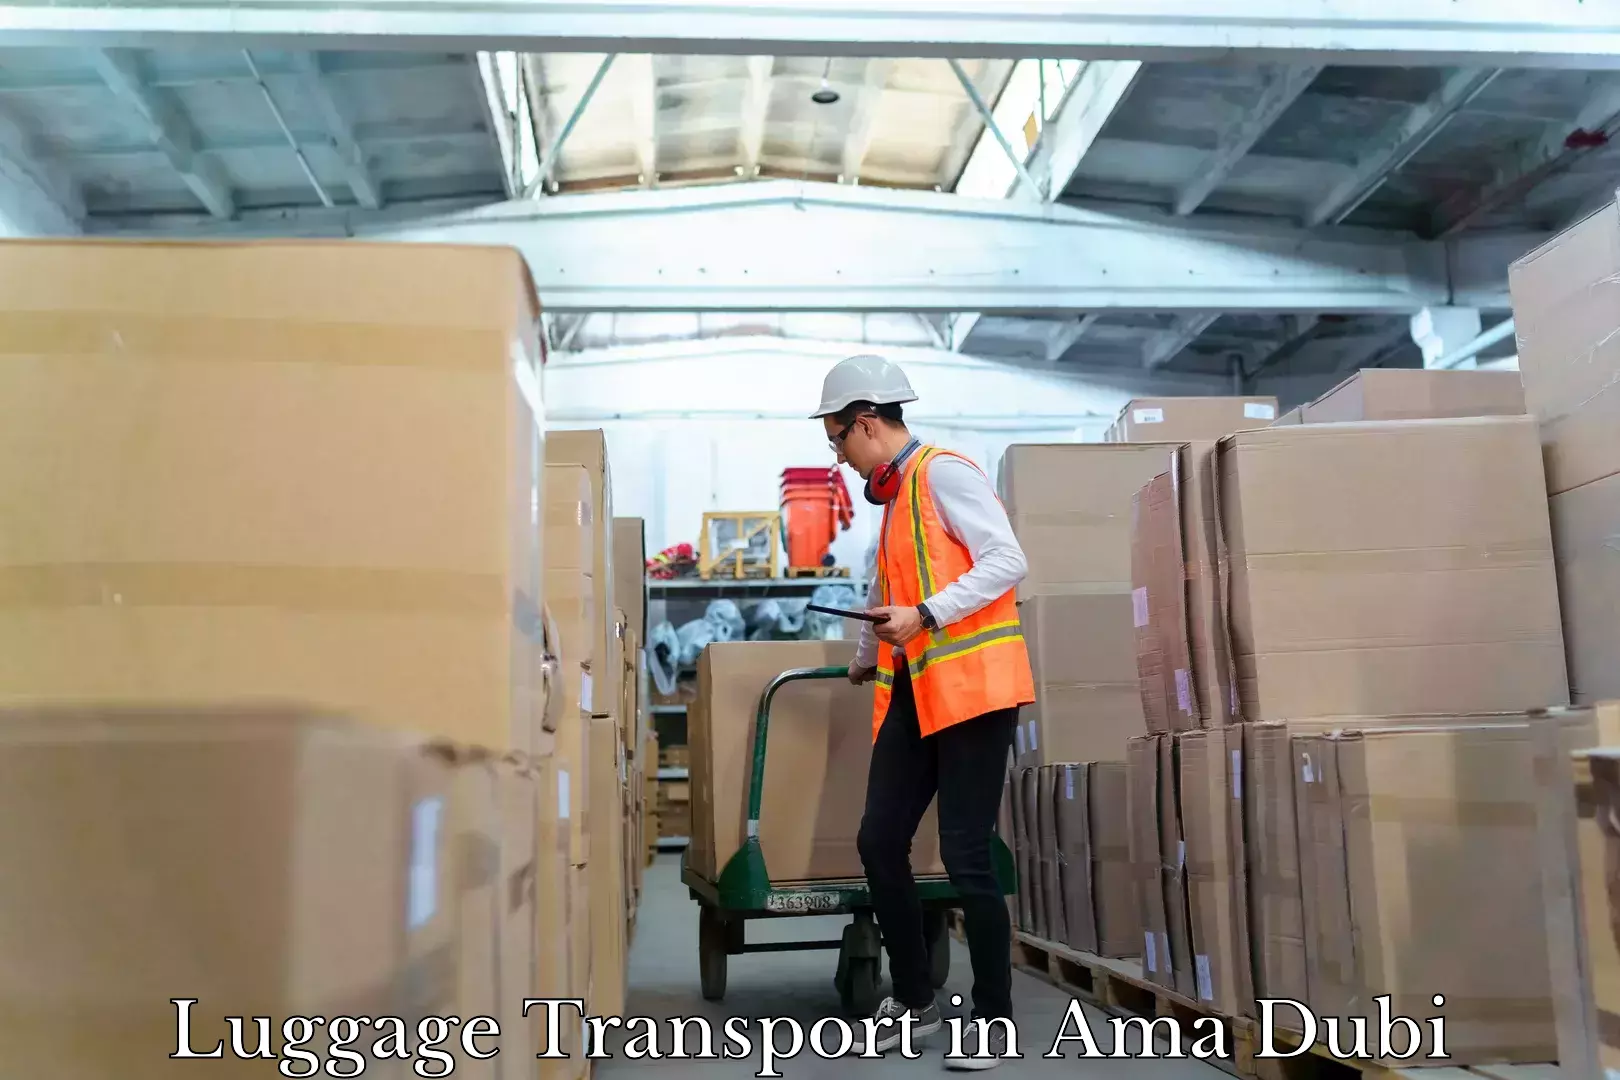 Luggage transport consulting in Ama Dubi